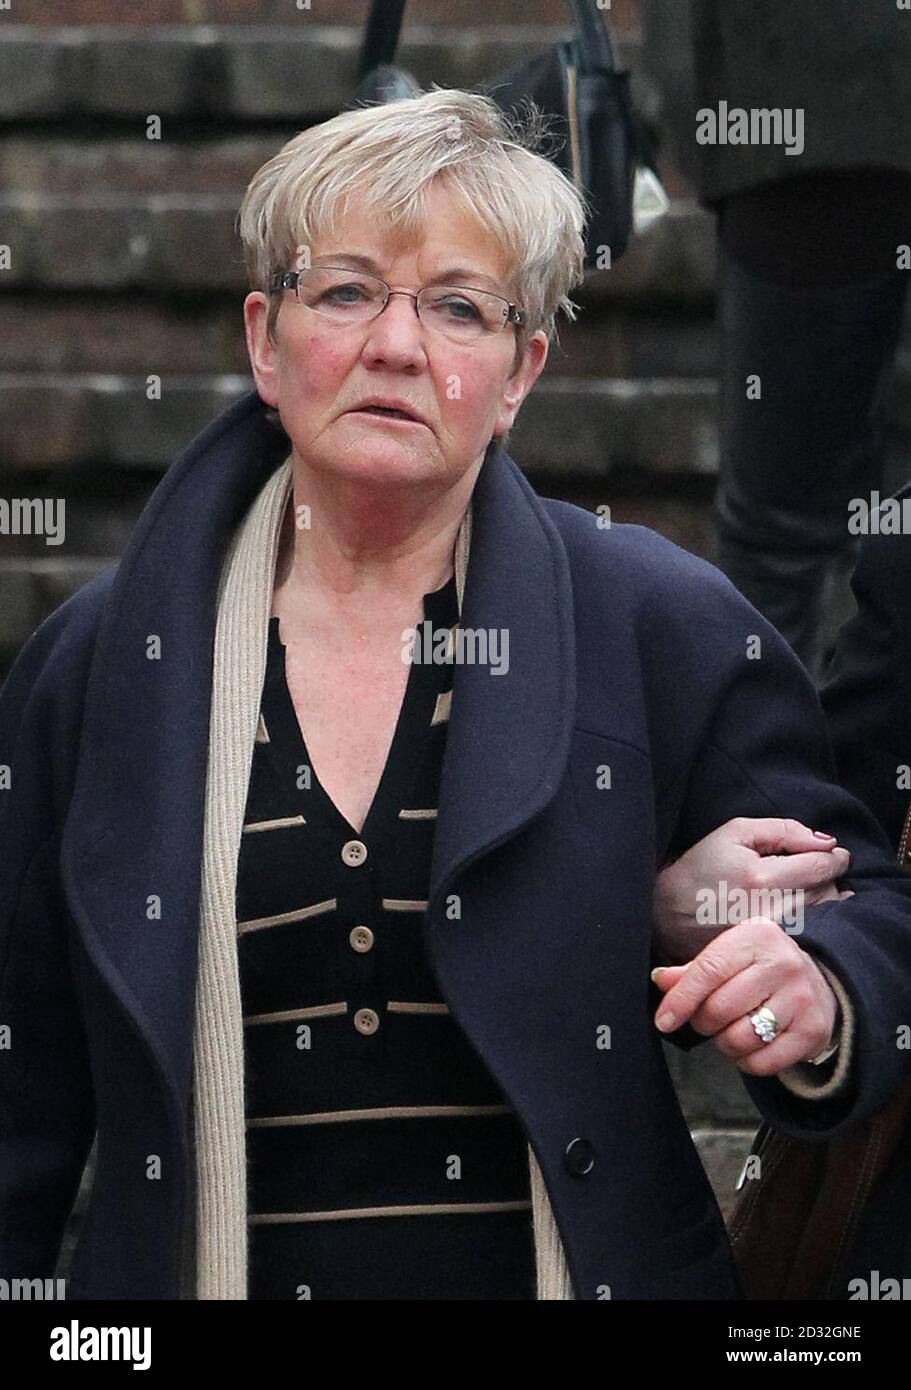 Nanette Fraser, wife of Brian Fraser, leaves Maidstone Crown Court, Kent, after he was found not guilty of attempting to kill his former lover by shooting her outside her country home. Stock Photo